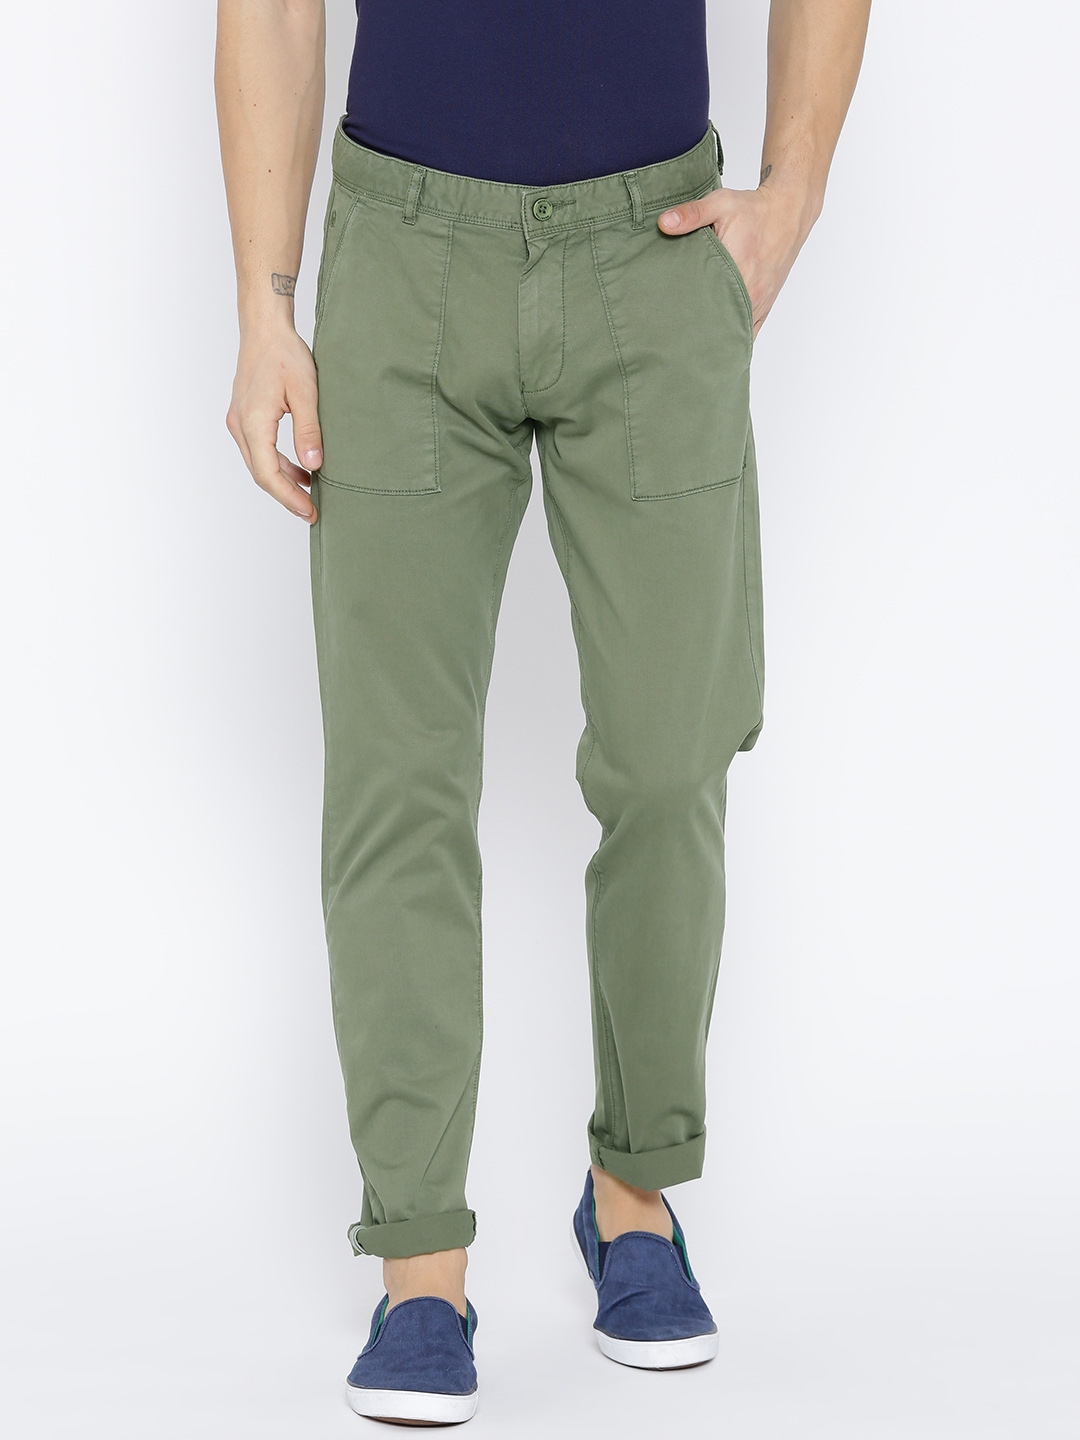 Buy United Colors Of Benetton Men Olive Green Slim Fit Solid Trousers   Trousers for Men 2265386  Myntra